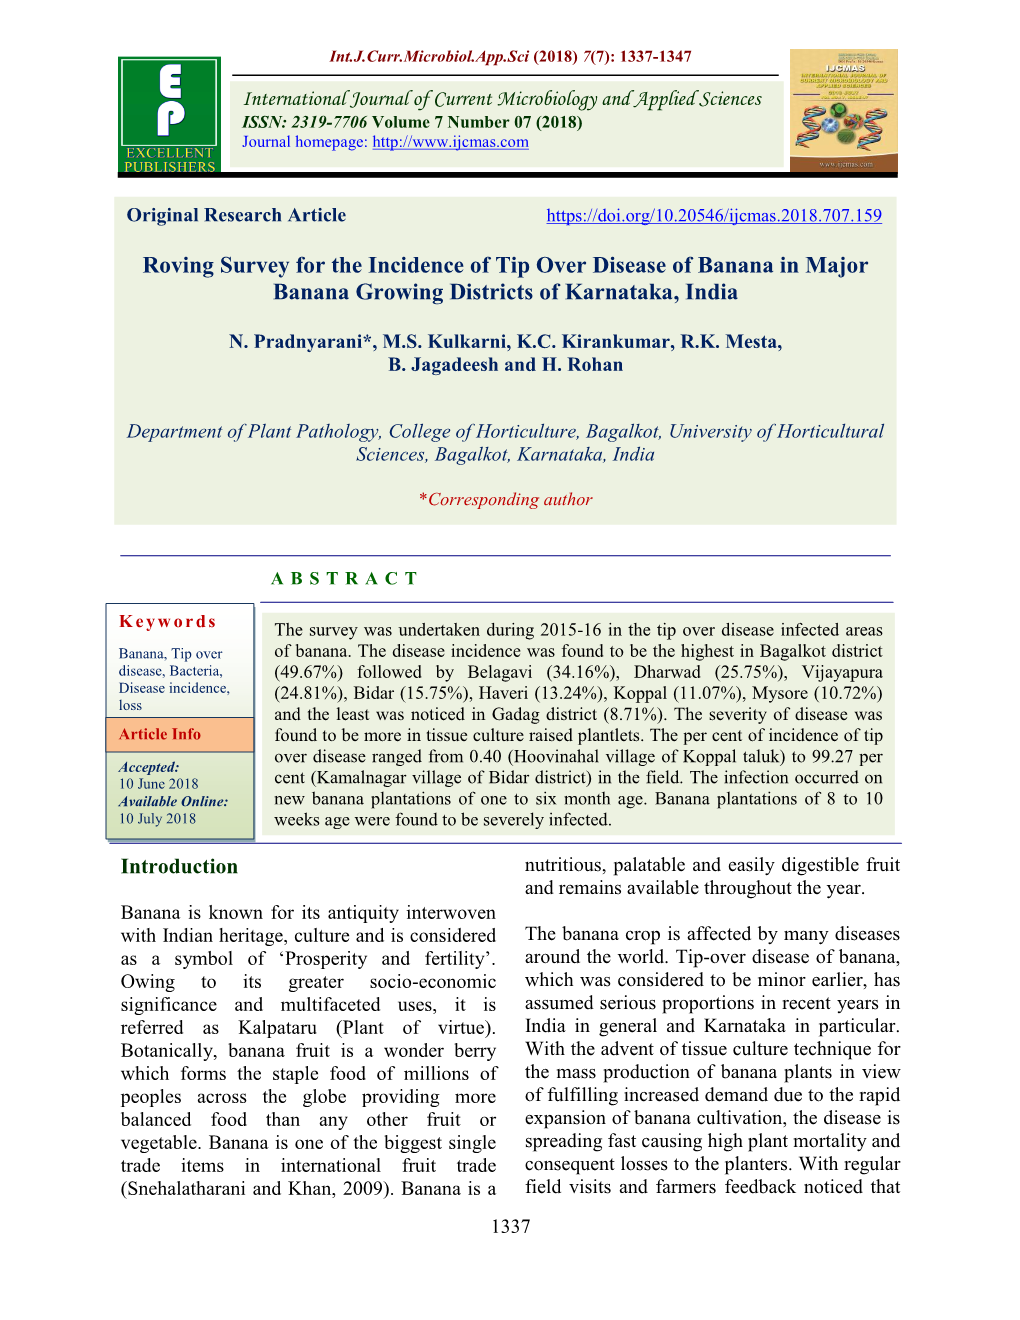 Roving Survey for the Incidence of Tip Over Disease of Banana in Major Banana Growing Districts of Karnataka, India